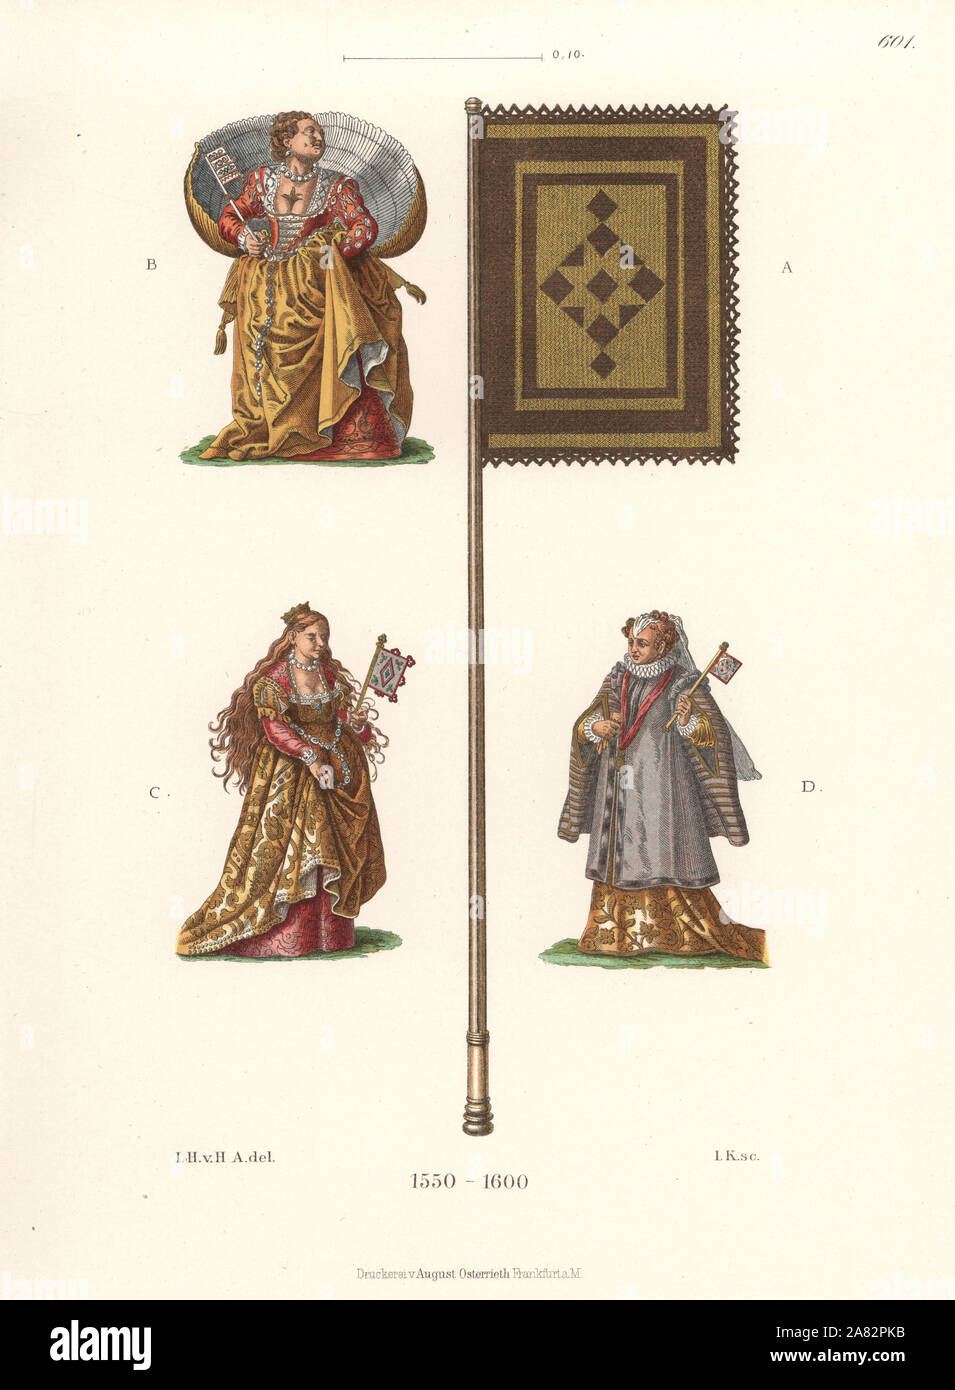 Italian woven straw fan or Ventarola A, noble Venetian woman in a shell cloak B, noble Venetian C, and noble Genoan D. After paintings in a famous costume book by Jost Amman. Chromolithograph from Hefner-Alteneck's Costumes, Artworks and Appliances from the Middle Ages to the 17th Century, Frankfurt, 1889. Illustration by Dr. Jakob Heinrich von Hefner-Alteneck, lithographed by  Johann Klipphahn. Dr. Hefner-Alteneck (1811-1903) was a German museum curator, archaeologist, art historian, illustrator and etcher. Stock Photo